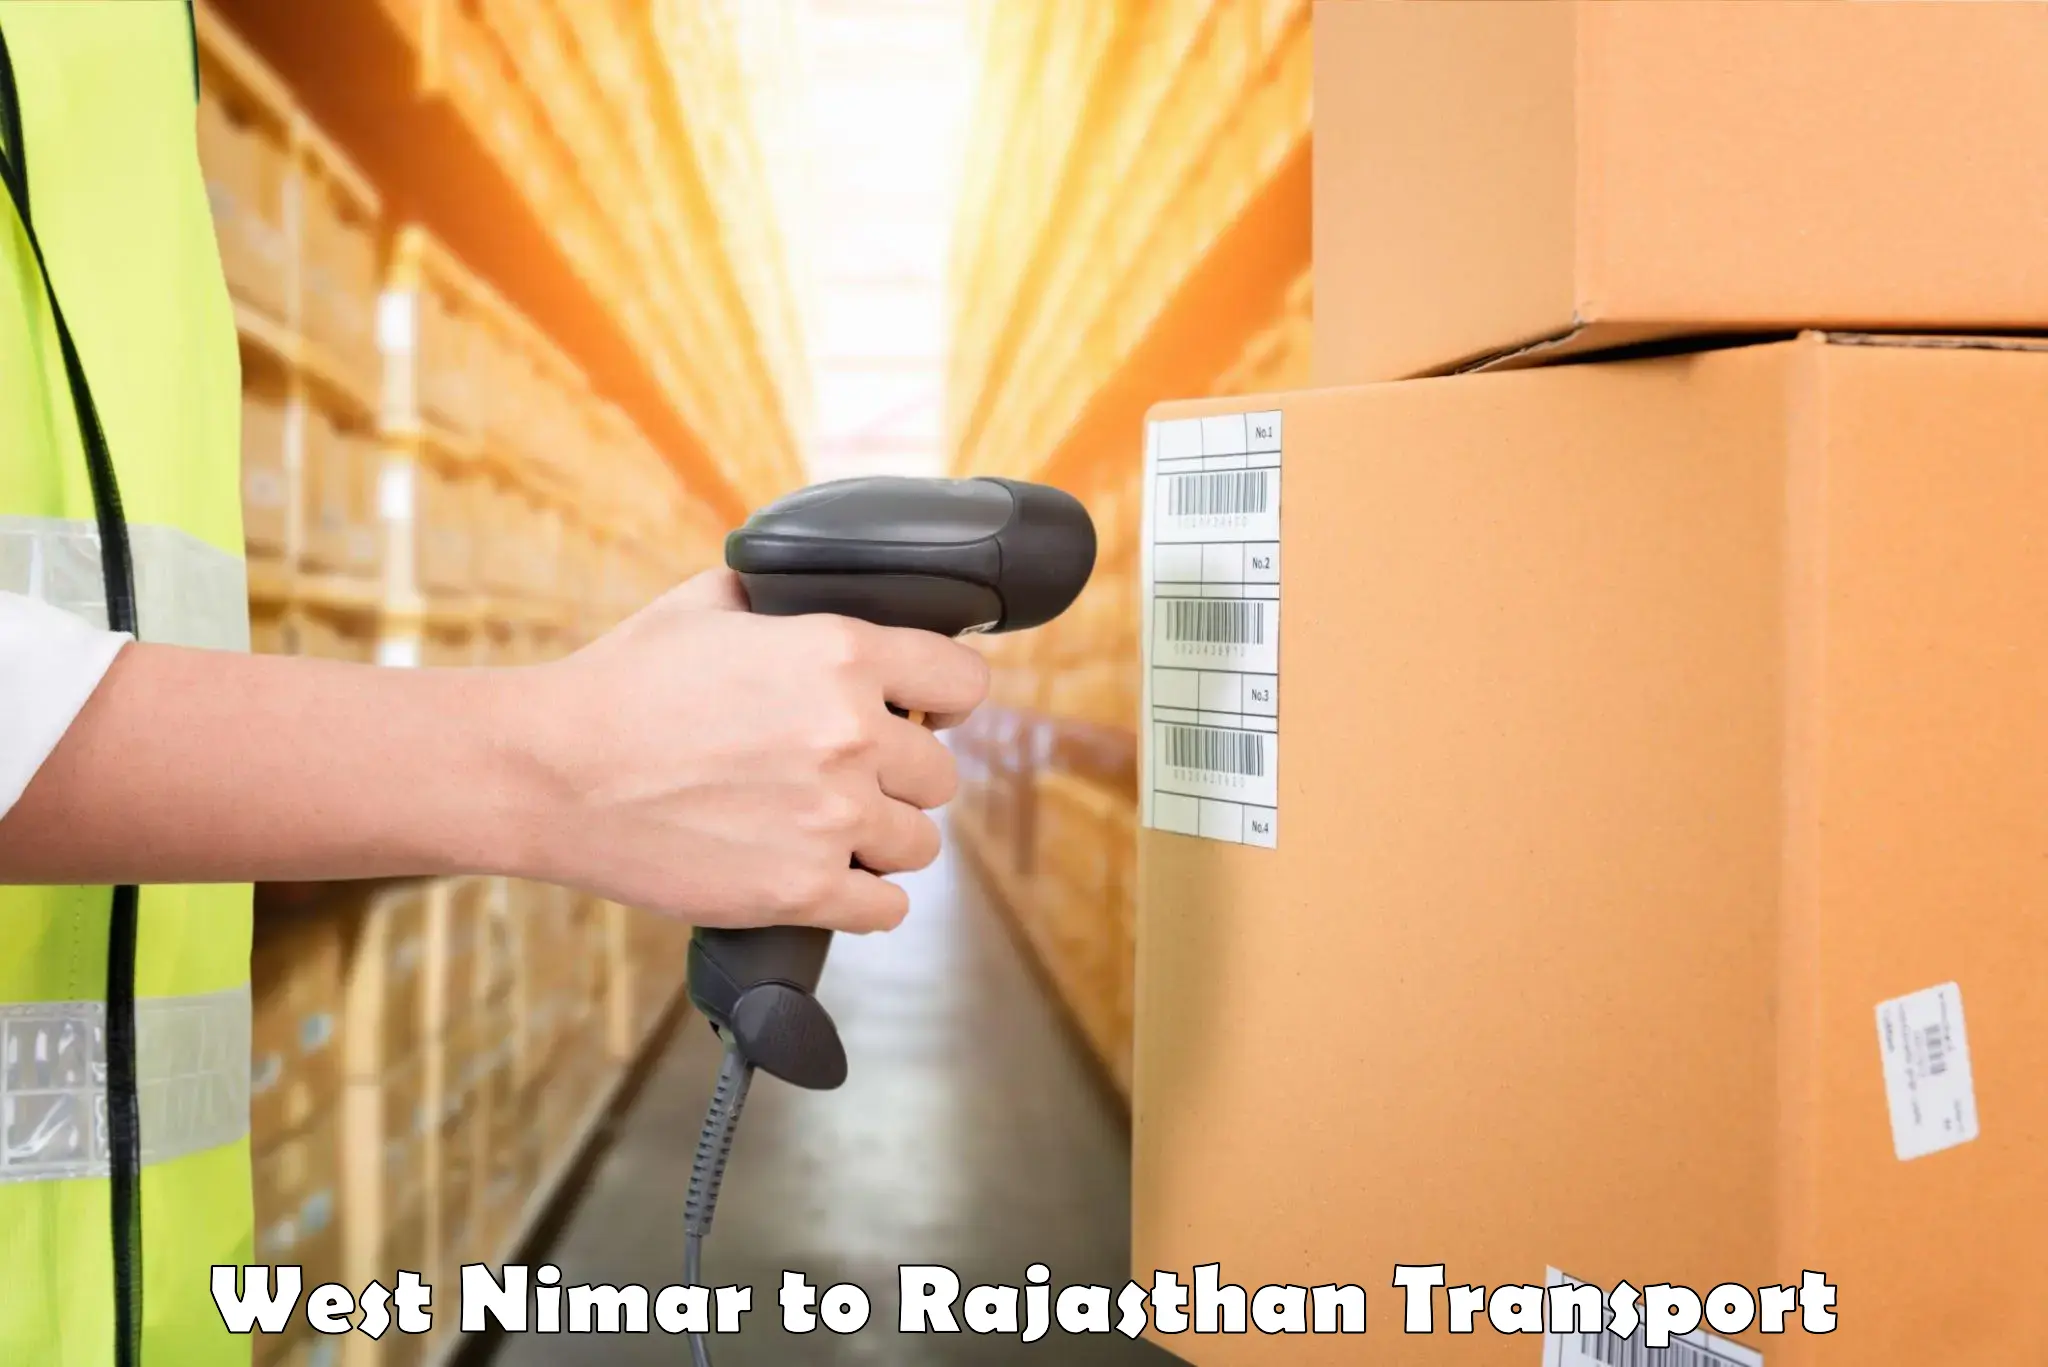 Container transport service West Nimar to Ajmer